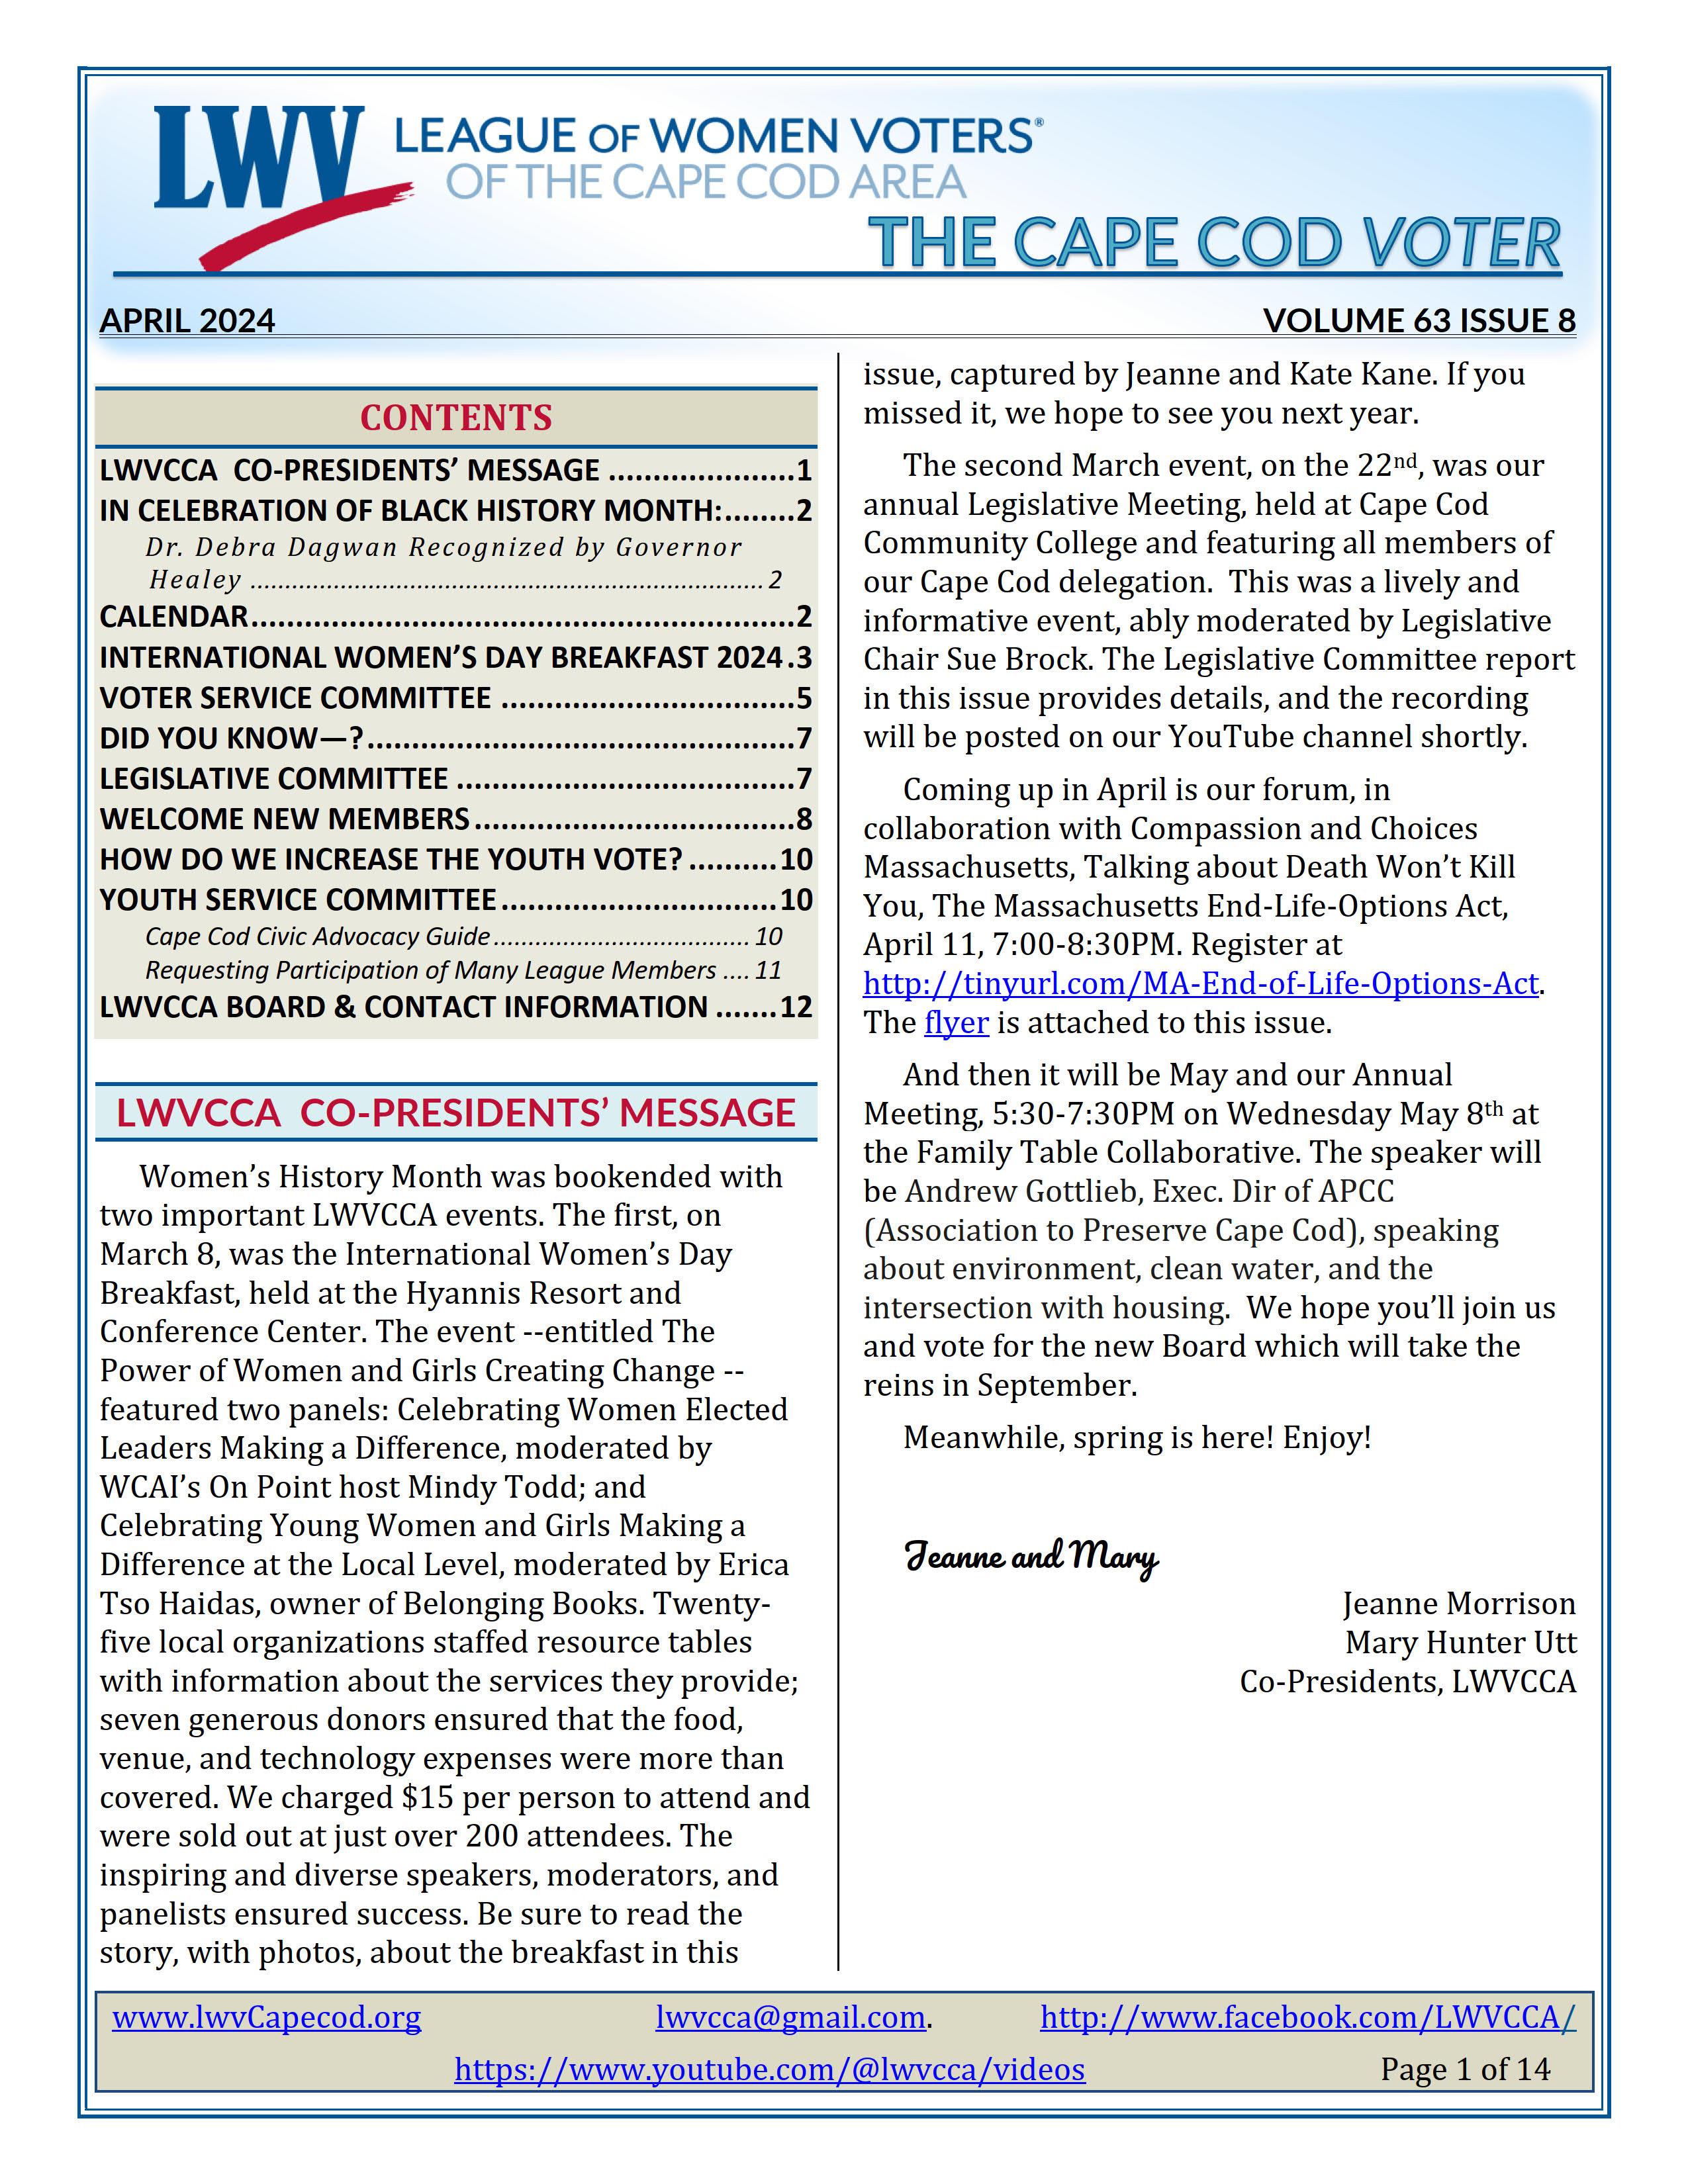 First page of Cape Cod VOTER Vol 63 Issue 8 April 2024